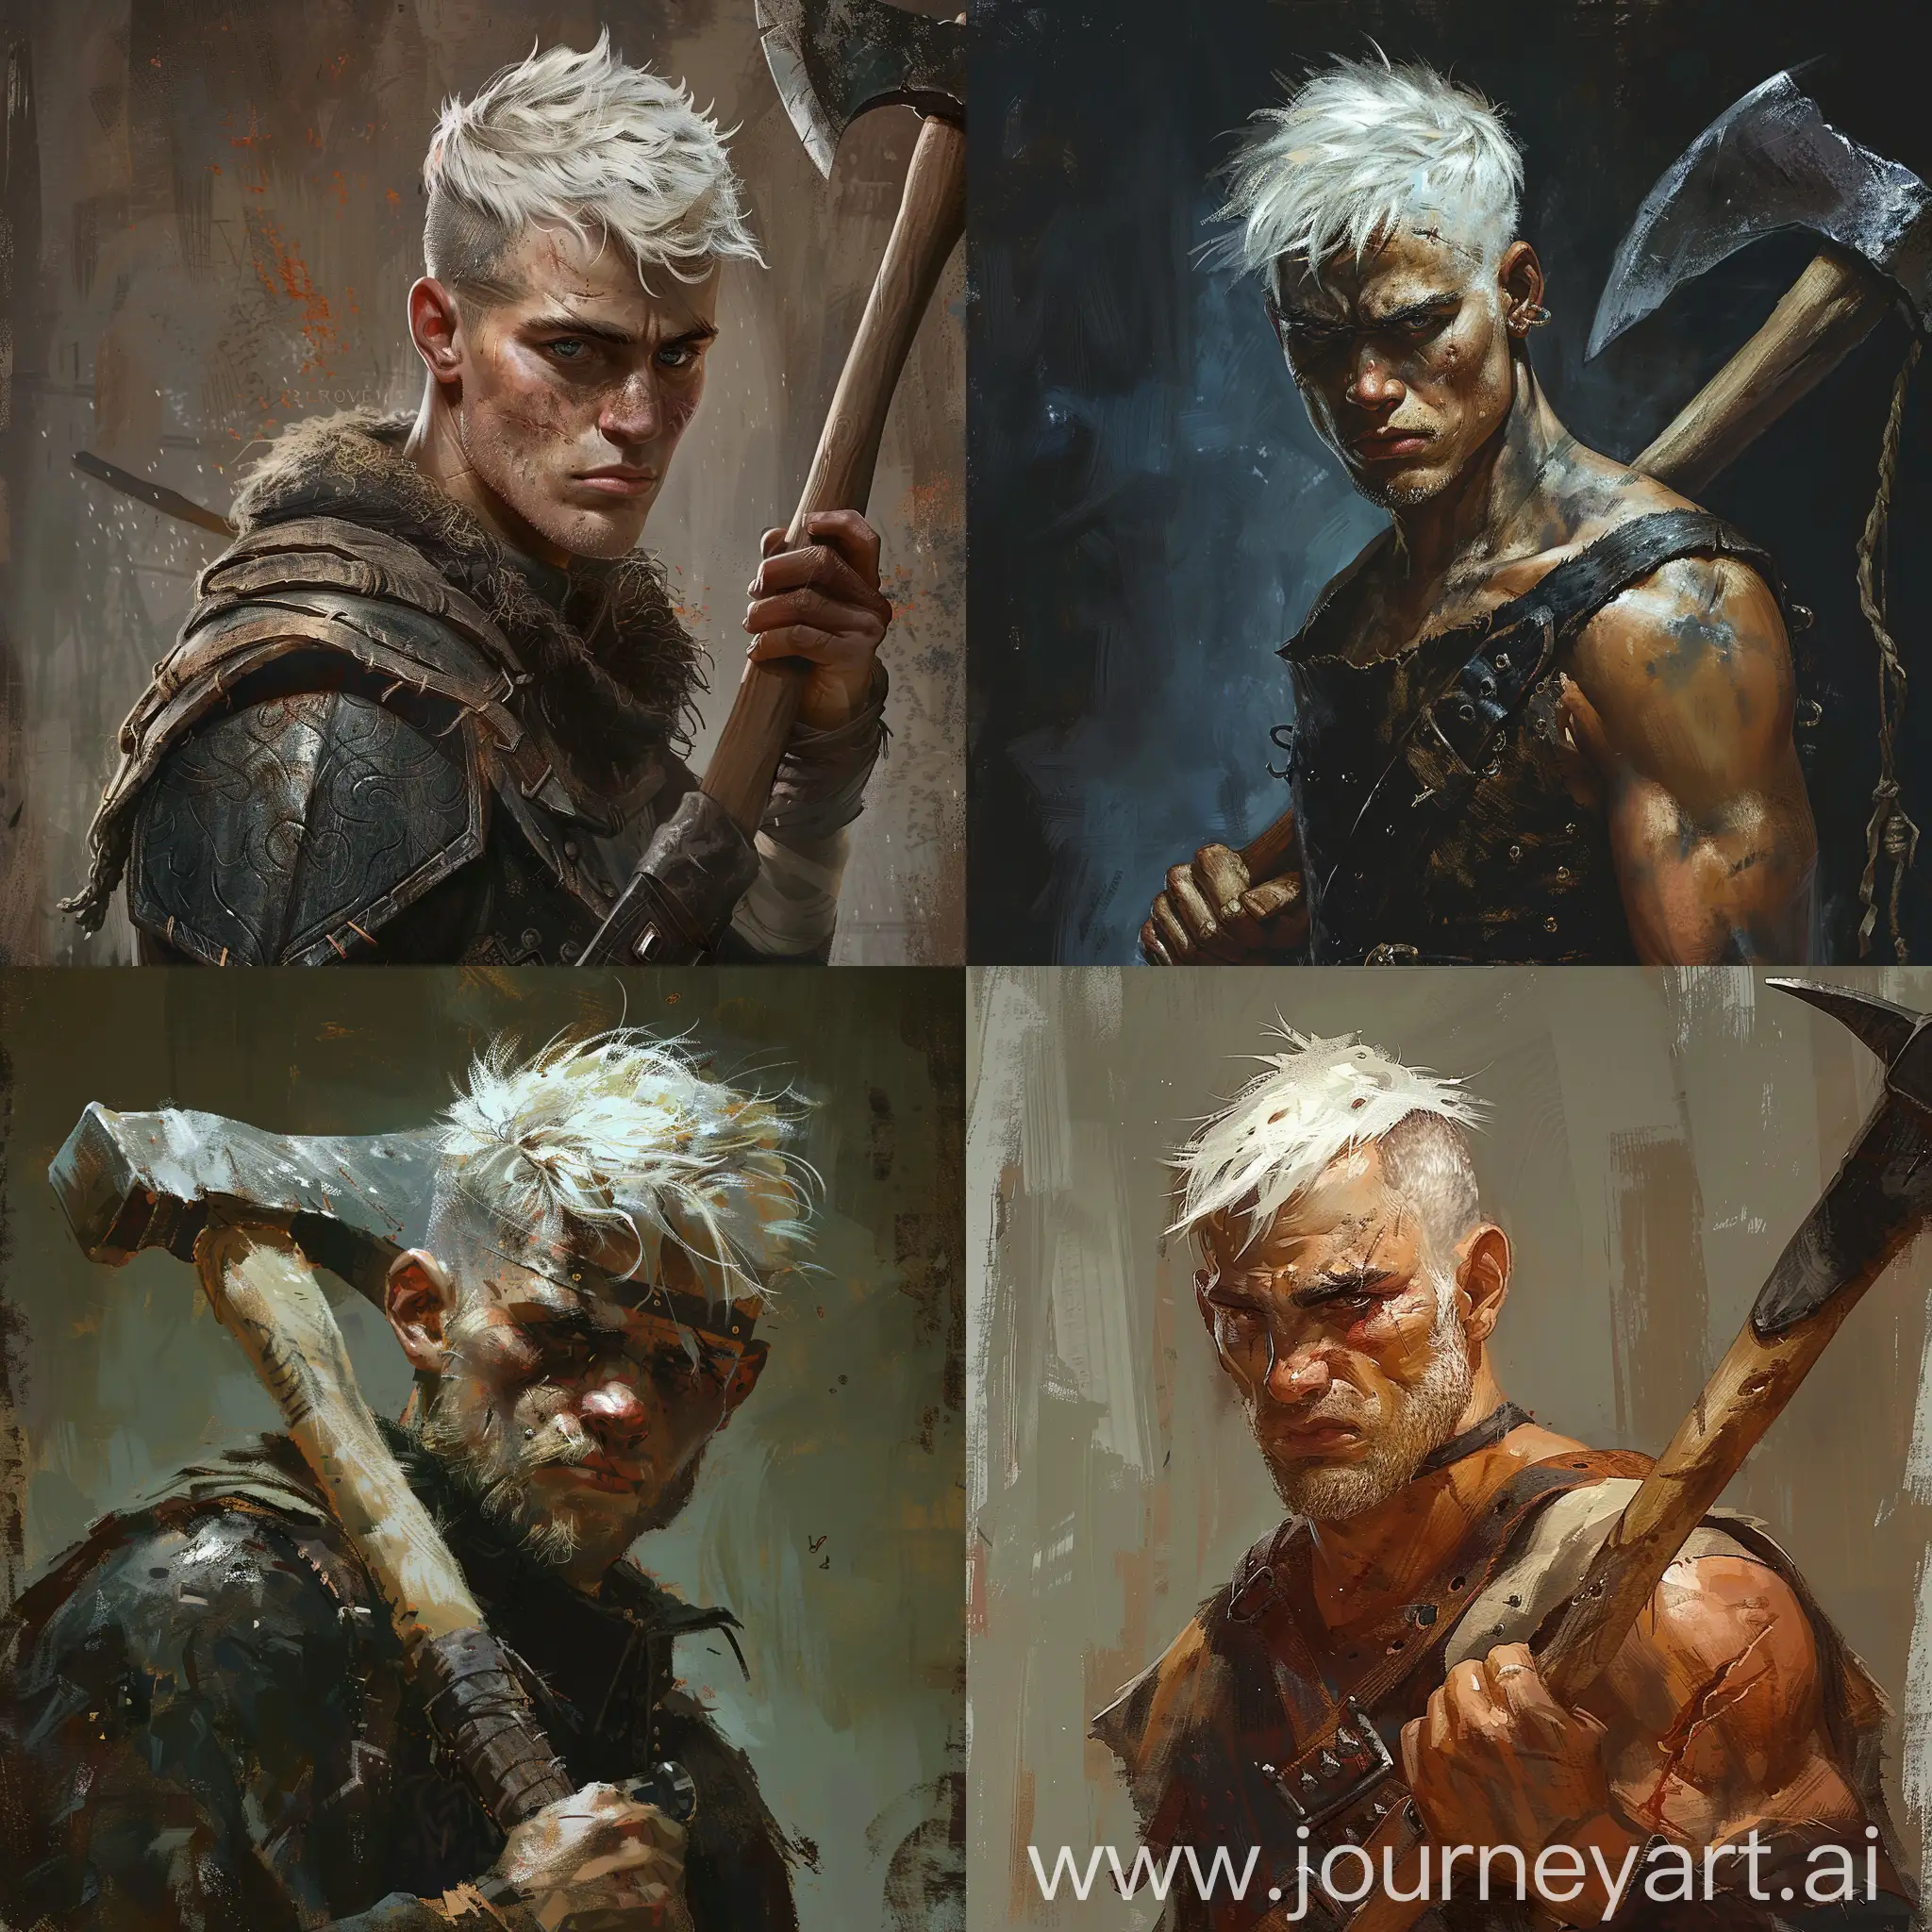 Young-WhiteHaired-Warrior-with-Menacing-Expression-and-Ax